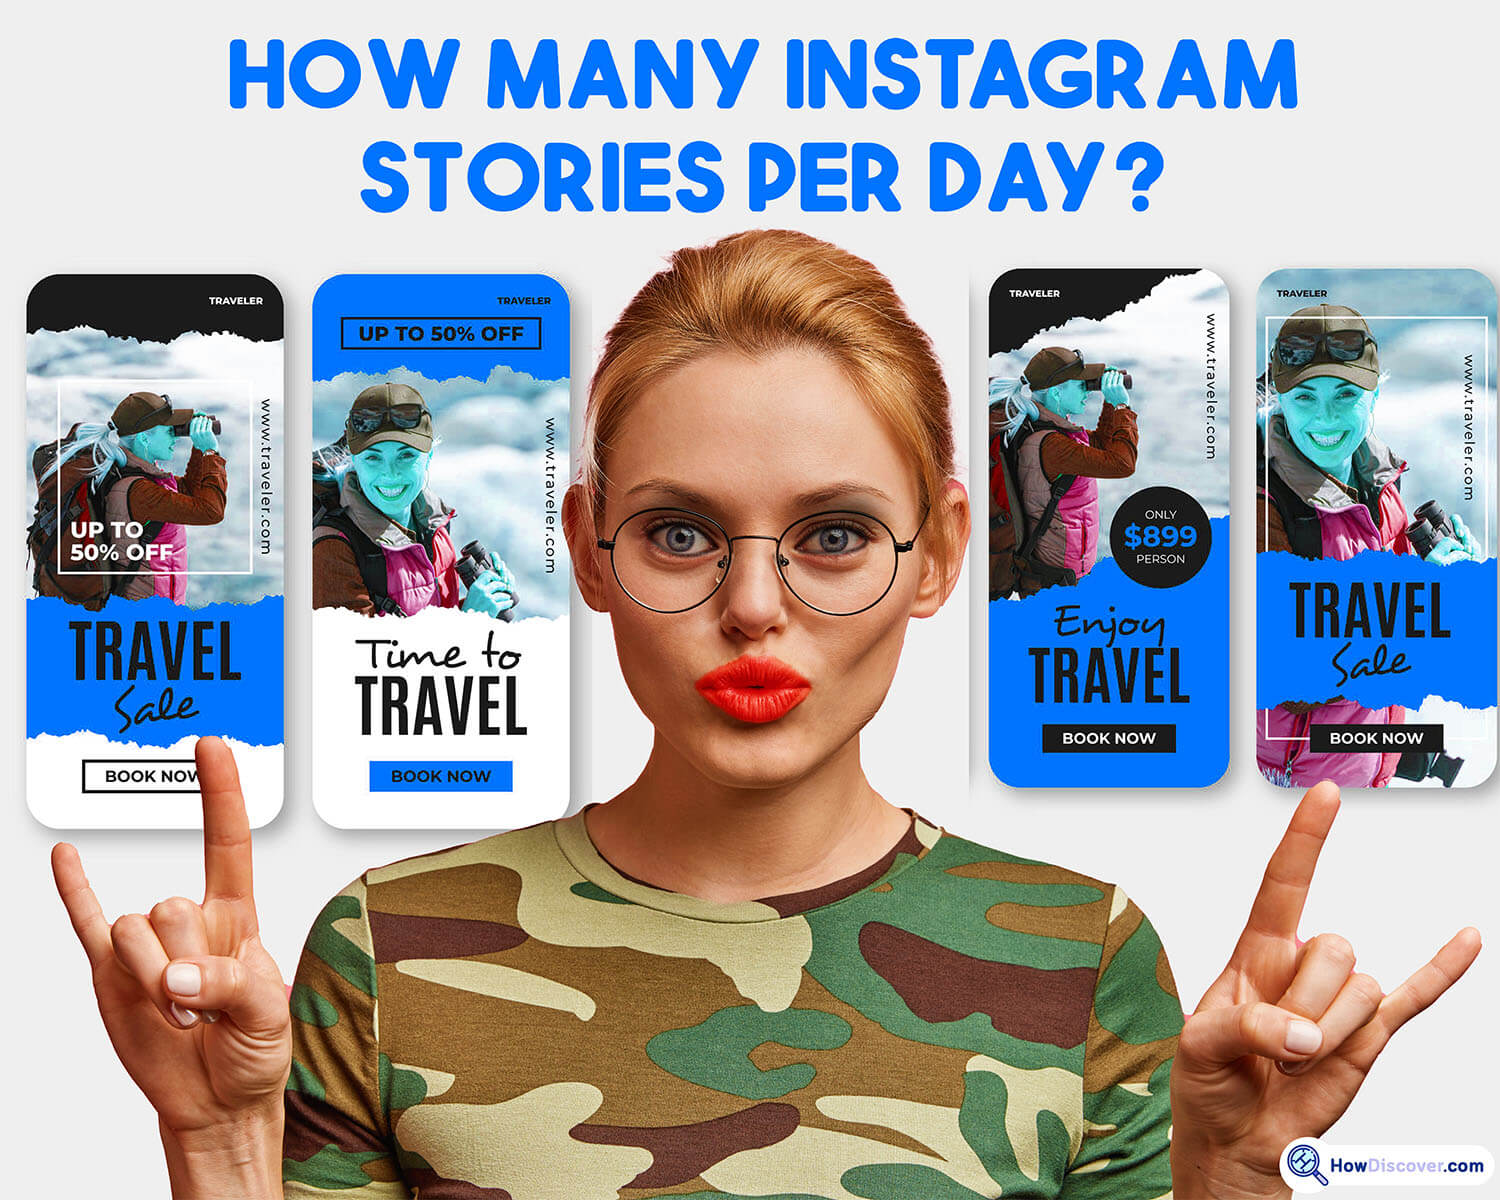 How Many Instagram Stories per Day